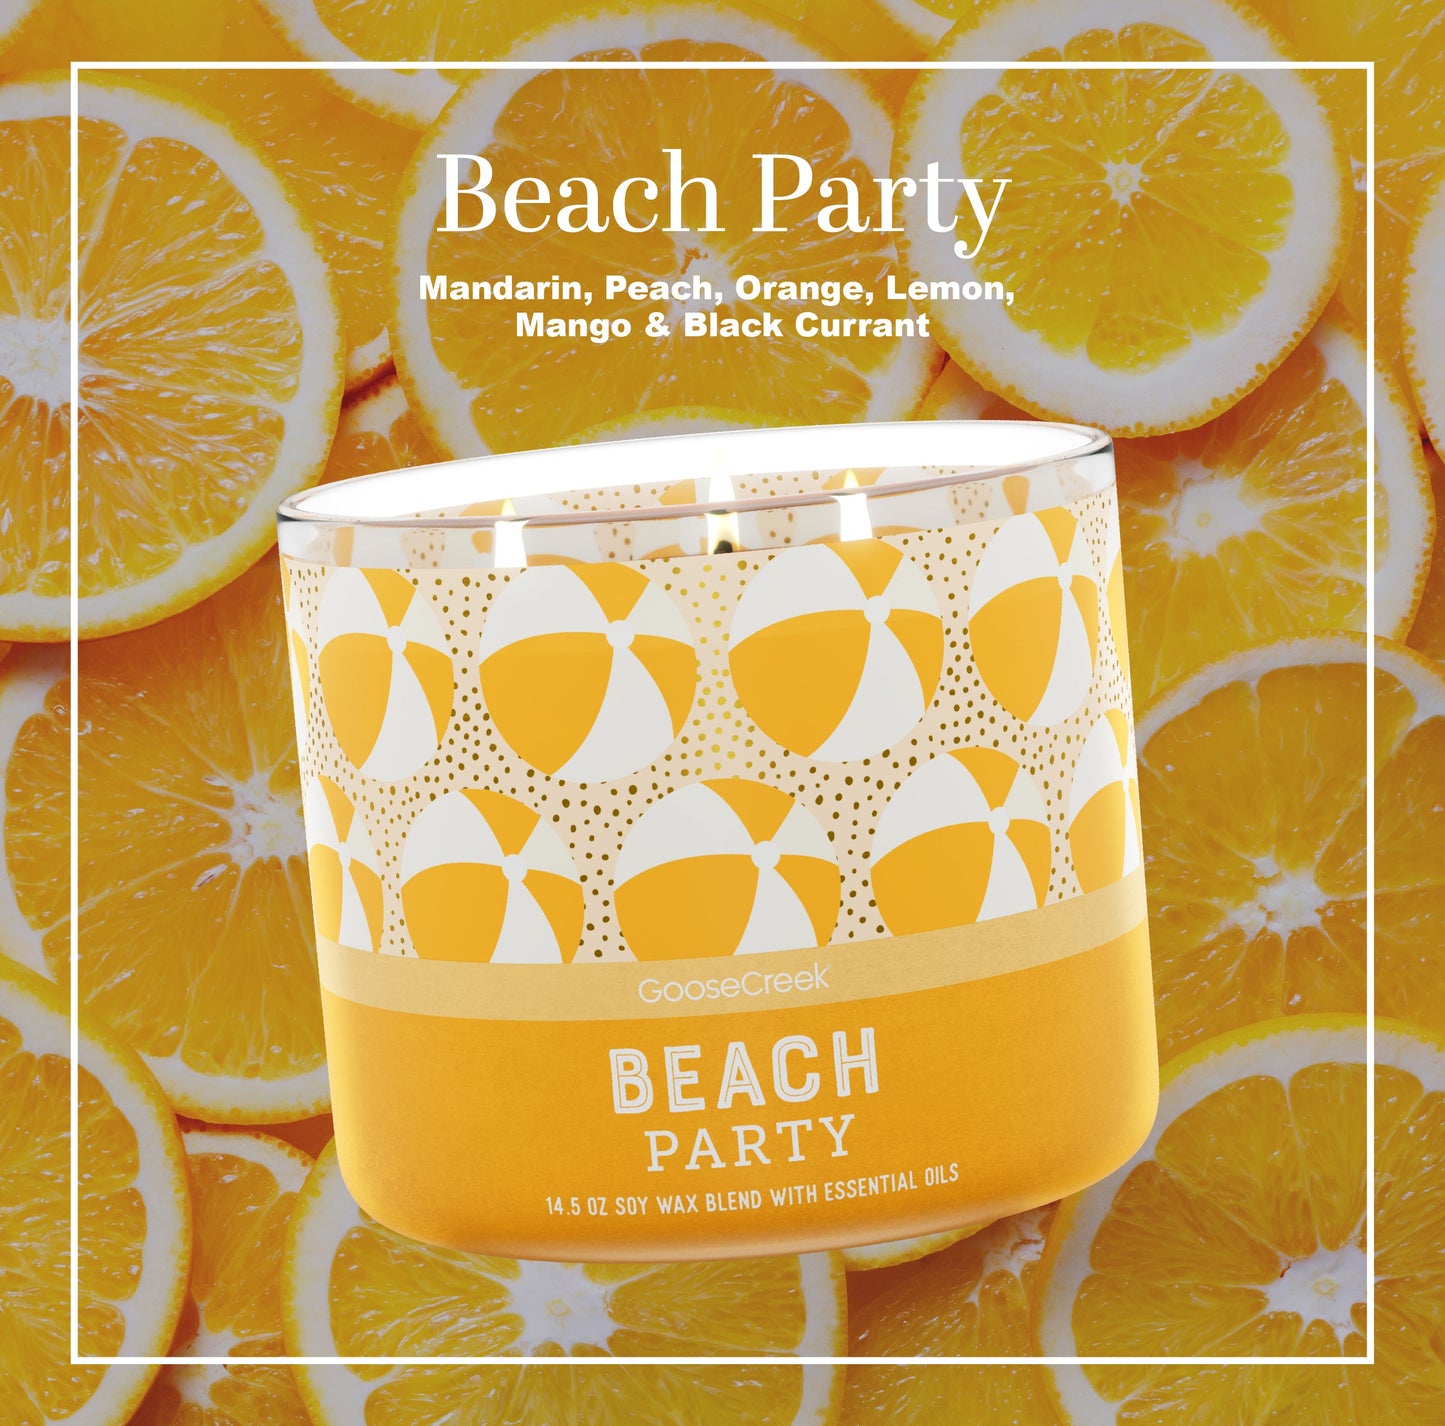 Beach Party Large 3-Wick Candle